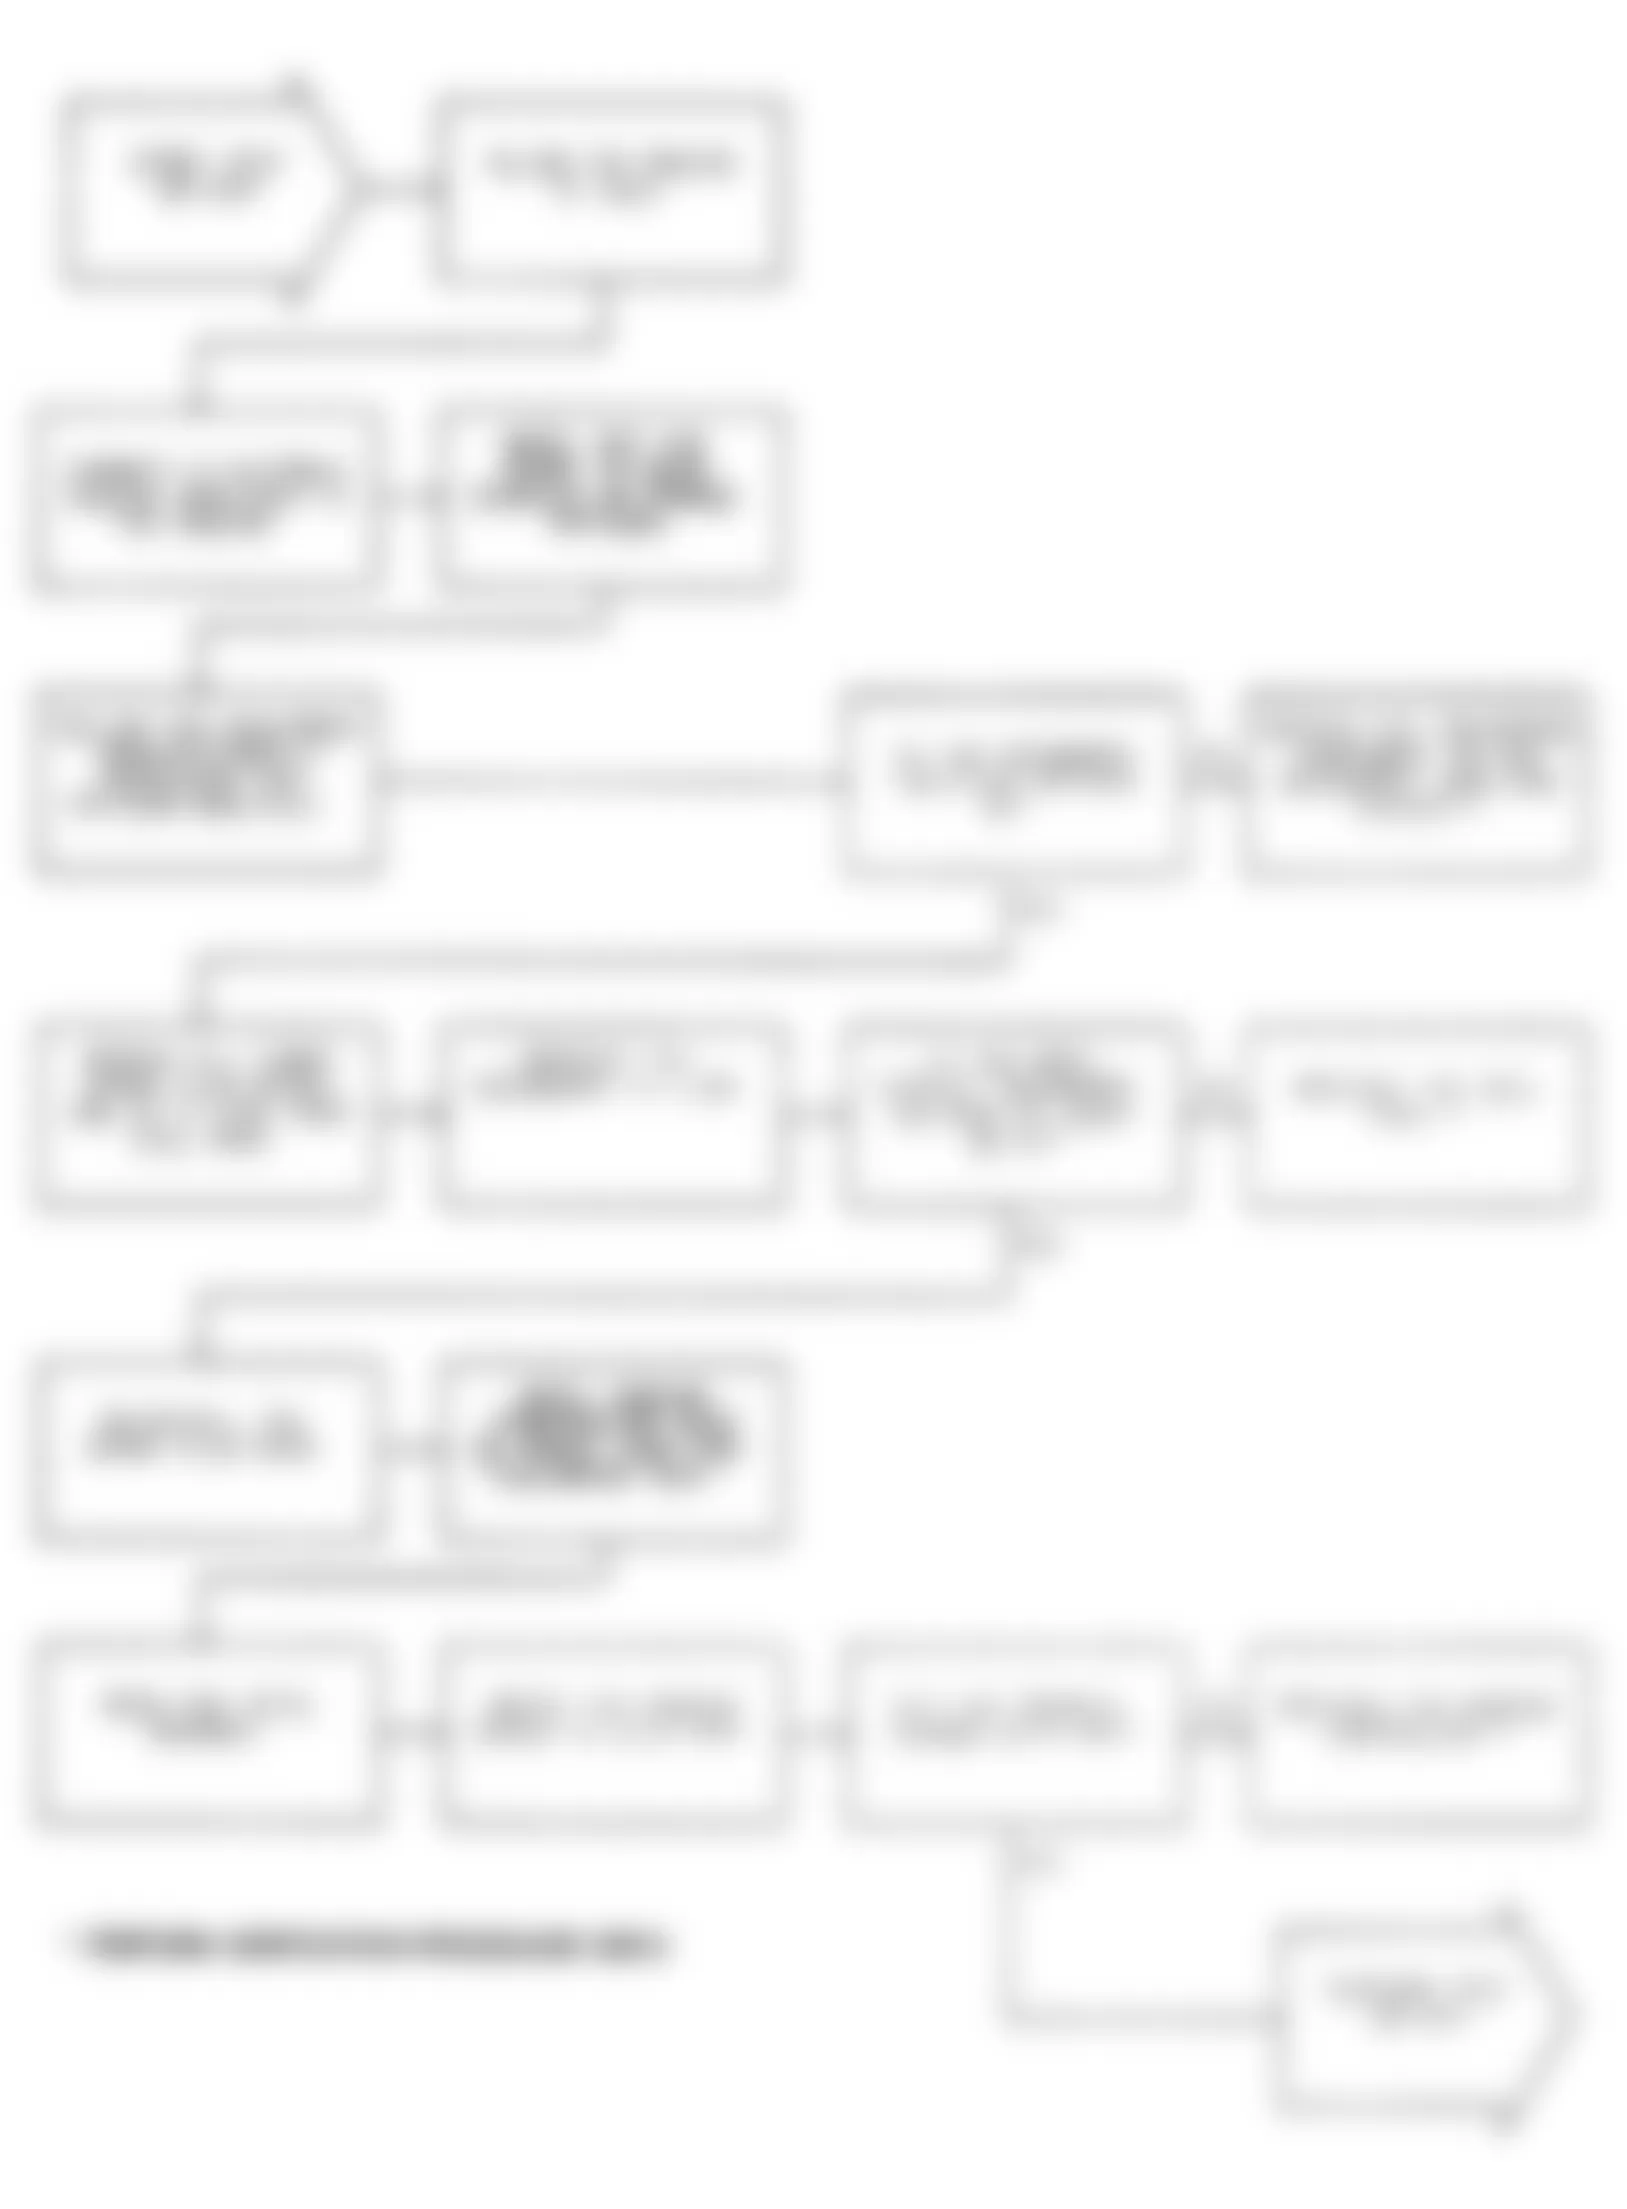 Chrysler Imperial 1991 - Component Locations -  Test DR-33A: Flowchart